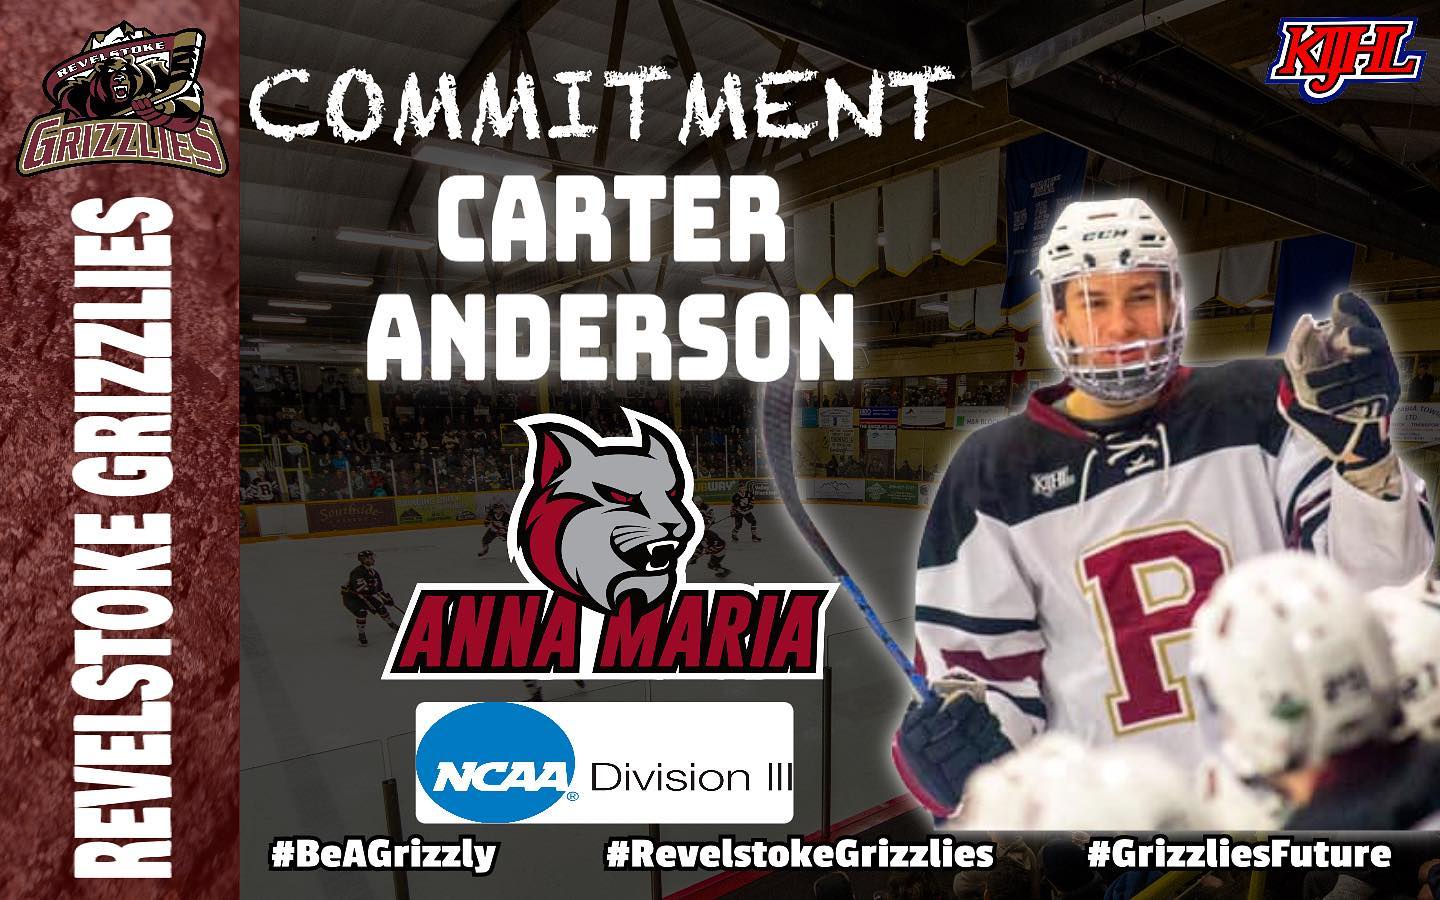 🚨 COMMITMENT ALERT 🚨

Congratulations to our former player Carter Anderson ( @carter21anderson ) on his commitment to Anna Maria College ( @goamcats ) NCAA D3 for the 2022-23 season!

Way to go Carter !!! We are all proud of you 👏

#RevelstokeGrizzlies #GoGrizzlies #KIJHL #AnnaMariaCollege #BeAGrizzly #PlayLikeAGrizzly